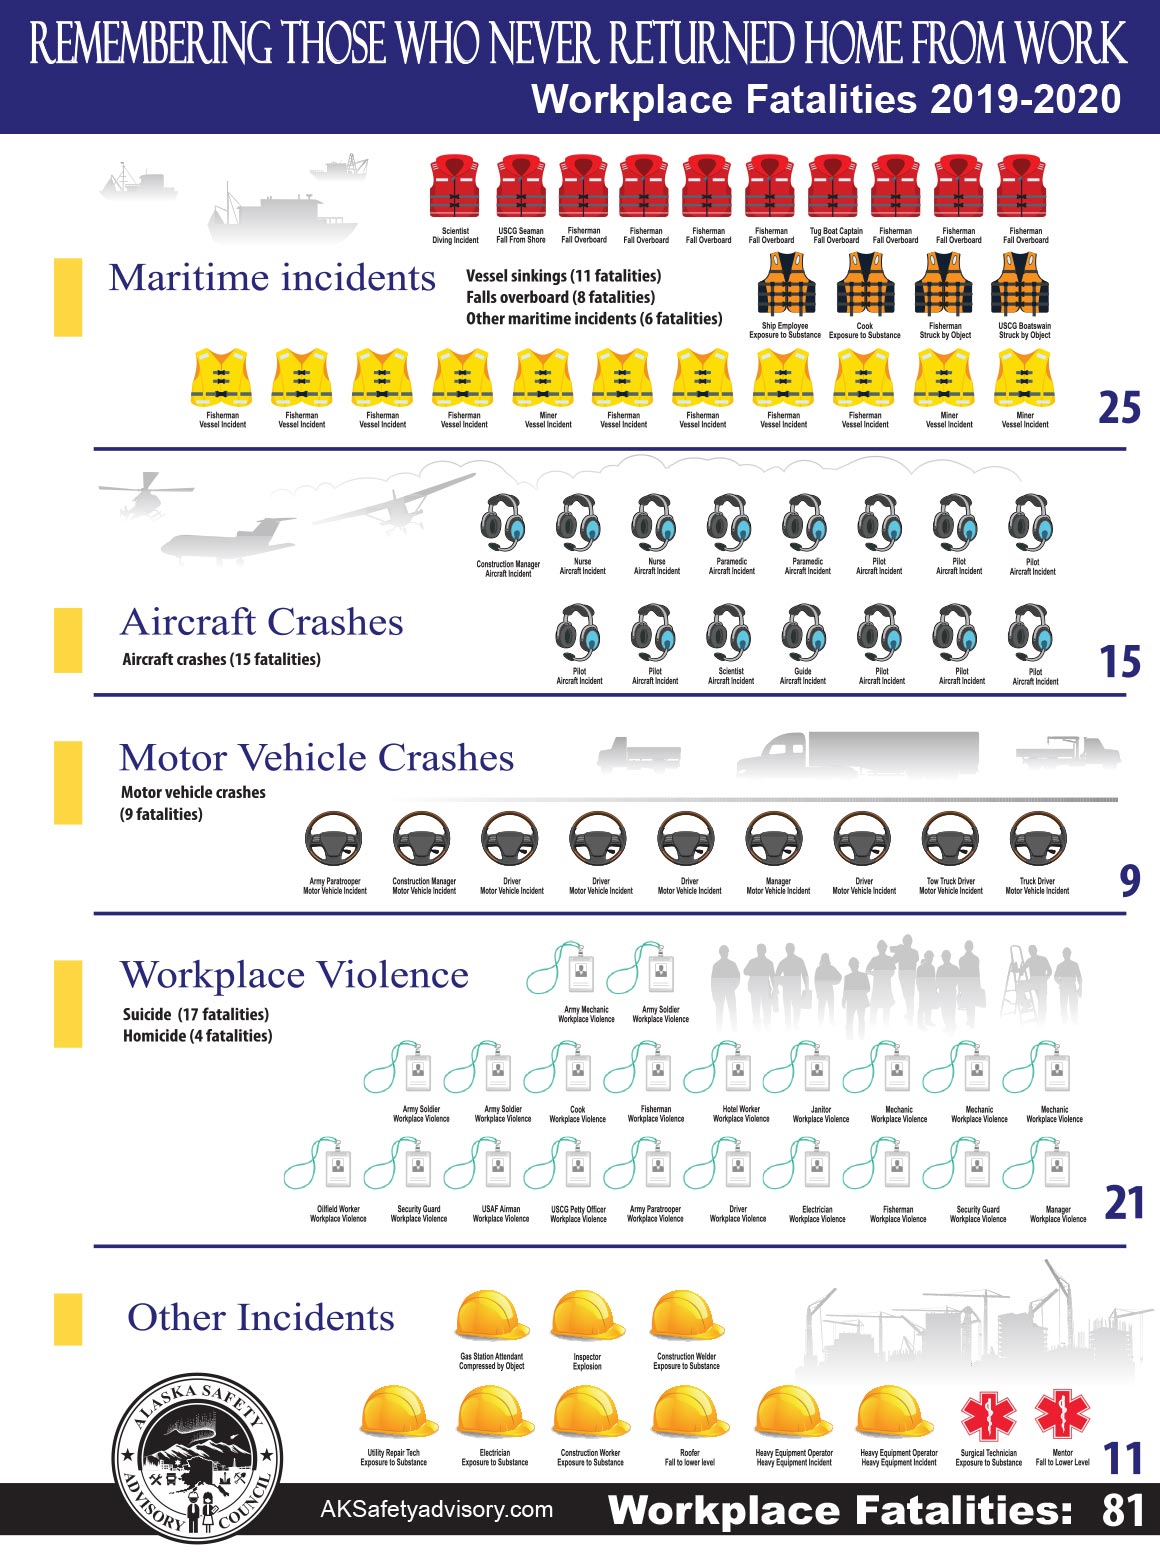 Info graphic 
2019	Construction Manager	Aircraft Incident
2019	Nurse	Aircraft Incident
2019	Nurse	Aircraft Incident
2019	Paramedic	Aircraft Incident
2019	Paramedic	Aircraft Incident
2019	Pilot	Aircraft Incident
2019	Pilot	Aircraft Incident
2019	Pilot	Aircraft Incident
2019	Pilot	Aircraft Incident
2019	Pilot	Aircraft Incident
2019	Scientist	Aircraft Incident
2020	Guide	Aircraft Incident
2020	Pilot	Aircraft Incident
2020	Pilot	Aircraft Incident
2020	Pilot	Aircraft Incident
2019	Scientist	Diving Incident
2019	USCG Seaman	Fall From Shore
2019	Cook	Exposure to Substance
2019	Ship Employee	Exposure to Substance
2019	Fisherman	Fall Overboard
2019	Fisherman	Fall Overboard
2019	Fisherman	Fall Overboard
2019	Tug Boat Captain	Fall Overboard
2020	Fisherman	Fall Overboard
2020	Fisherman	Fall Overboard
2020	Fisherman	Fall Overboard
2020	Fisherman	Fall Overboard
2019	Fisherman	Struck by Object
2019	USCG Boatswain	Struck by Object
2019	Fisherman	Vessel Incident
2019	Fisherman	Vessel Incident
2019	Fisherman	Vessel Incident
2019	Fisherman	Vessel Incident
2019	Fisherman	Vessel Incident
2019	Fisherman	Vessel Incident
2020	Fisherman	Vessel Incident
2020	Fisherman	Vessel Incident
2020	Fisherman	Vessel Incident
2020	Miner	Vessel Incident
2020	Miner	Vessel Incident
2019	Army Paratrooper	Motor Vehicle Incident
2019	Construction Manager	Motor Vehicle Incident
2019	Driver	Motor Vehicle Incident
2019	Driver	Motor Vehicle Incident
2019	Driver	Motor Vehicle Incident
2019	Manager	Motor Vehicle Incident
2020	Driver	Motor Vehicle Incident
2020	Tow Truck Driver	Motor Vehicle Incident
2020	Truck Driver	Motor Vehicle Incident
2019	Gas Station Attendant	Compressed by Object
2020	Inspector	Explosion
2019	Construction Welder	Exposure to Substance
2019	Surgical Technician	Exposure to Substance
2020	Utility Repair Tech	Exposure to Substance
2020	Electrician	Exposure to Substance
2020	Construction	Exposure to Substance
2020	Roofer	Fall to lower level
2020	Mentor	Fall to Lower Level
2019	Heavy Equipment Operator	Heavy Equipment Incident
2019	Heavy Equipment Operator	Heavy Equipment Incident
2019	Army Mechanic	Workplace Violence
2019	Army Soldier	Workplace Violence
2019	Army Soldier	Workplace Violence
2019	Army Soldier	Workplace Violence
2019	Cook	Workplace Violence
2019	Fisherman	Workplace Violence
2019	Hotel Worker	Workplace Violence
2019	Janitor	Workplace Violence
2019	Mechanic	Workplace Violence
2019	Mechanic	Workplace Violence
2019	Mechanic	Workplace Violence
2019	Oilfield Worker	Workplace Violence
2019	Security Guard	Workplace Violence
2019	USAF Airman	Workplace Violence
2019	USCG Petty Officer	Workplace Violence
2020	Army Paratrooper	Workplace Violence
2020	Driver	Workplace Violence
2020	Electrician	Workplace Violence
2020	Fisherman	Workplace Violence
2020	Security Guard	Workplace Violence
2020	Manager	Workplace Violence
		
